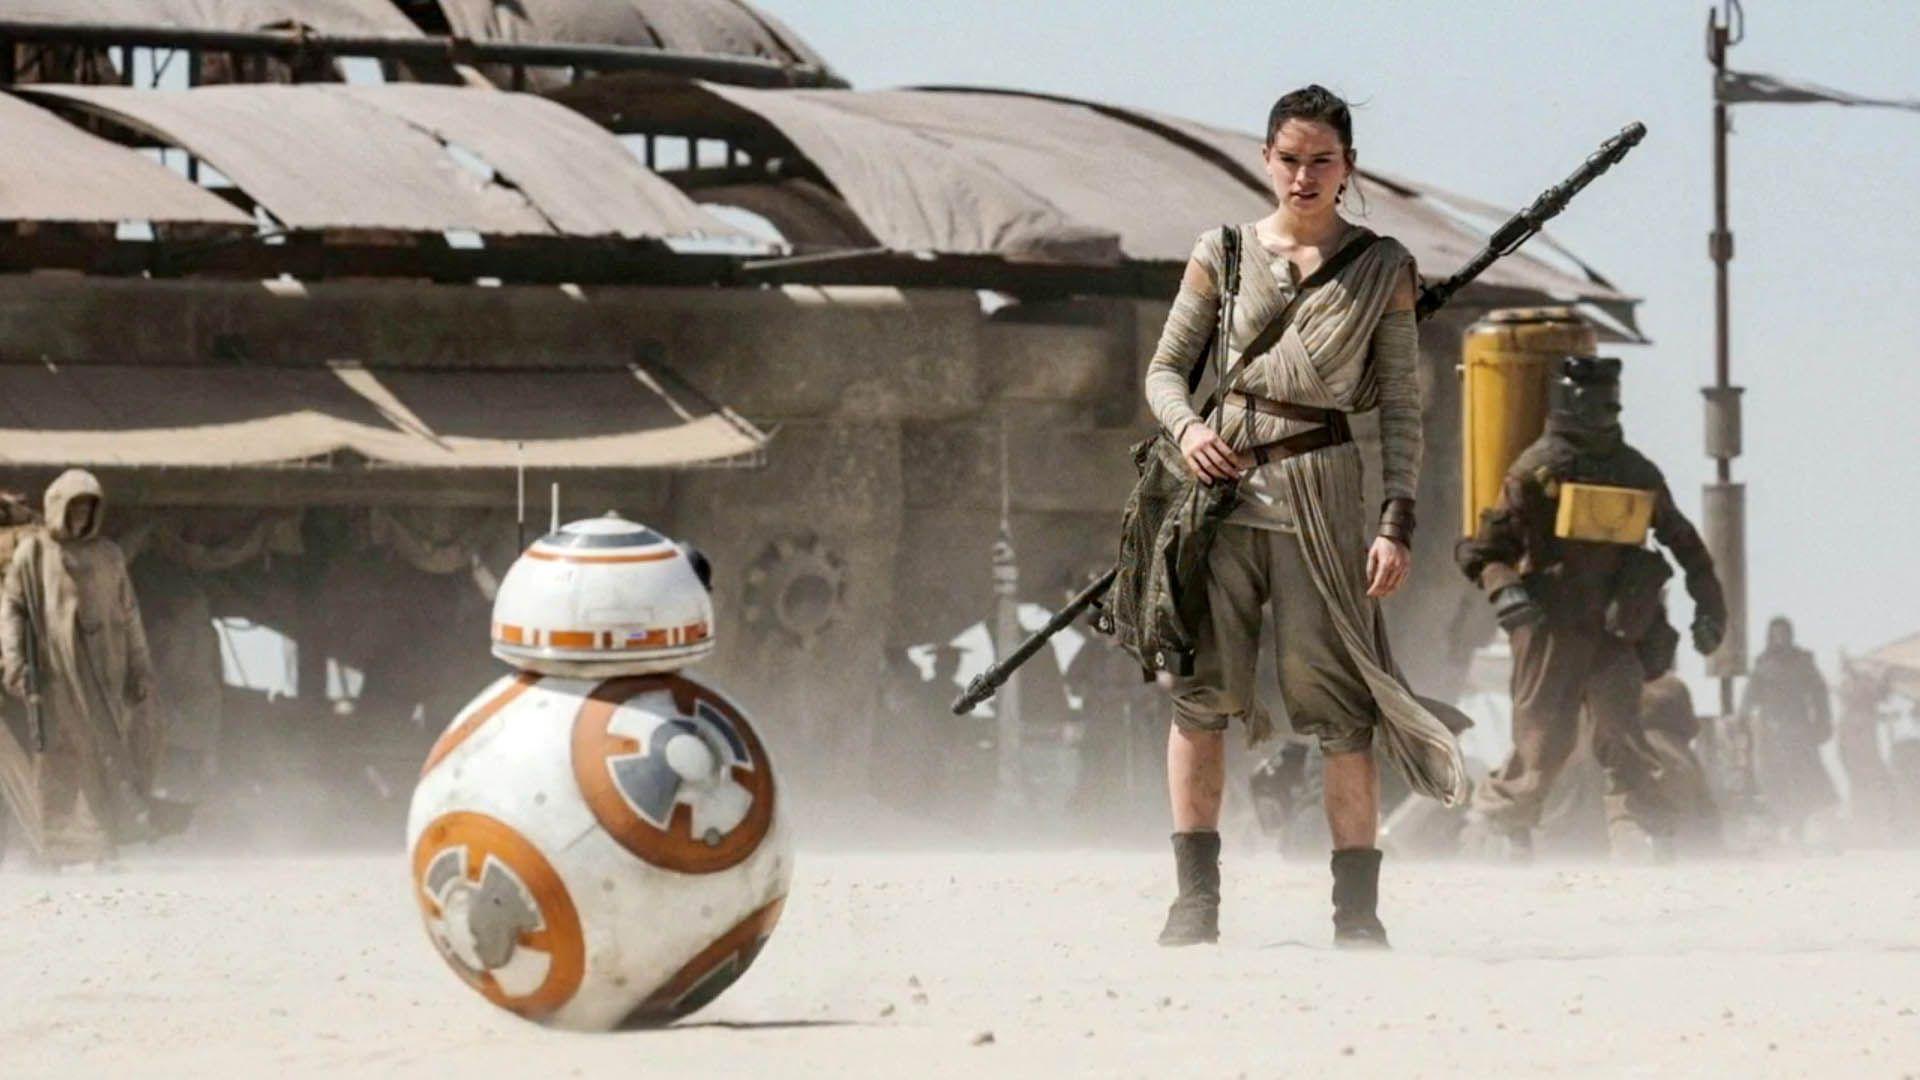 BB 8 And Rey Wars 7: The Force Awakens